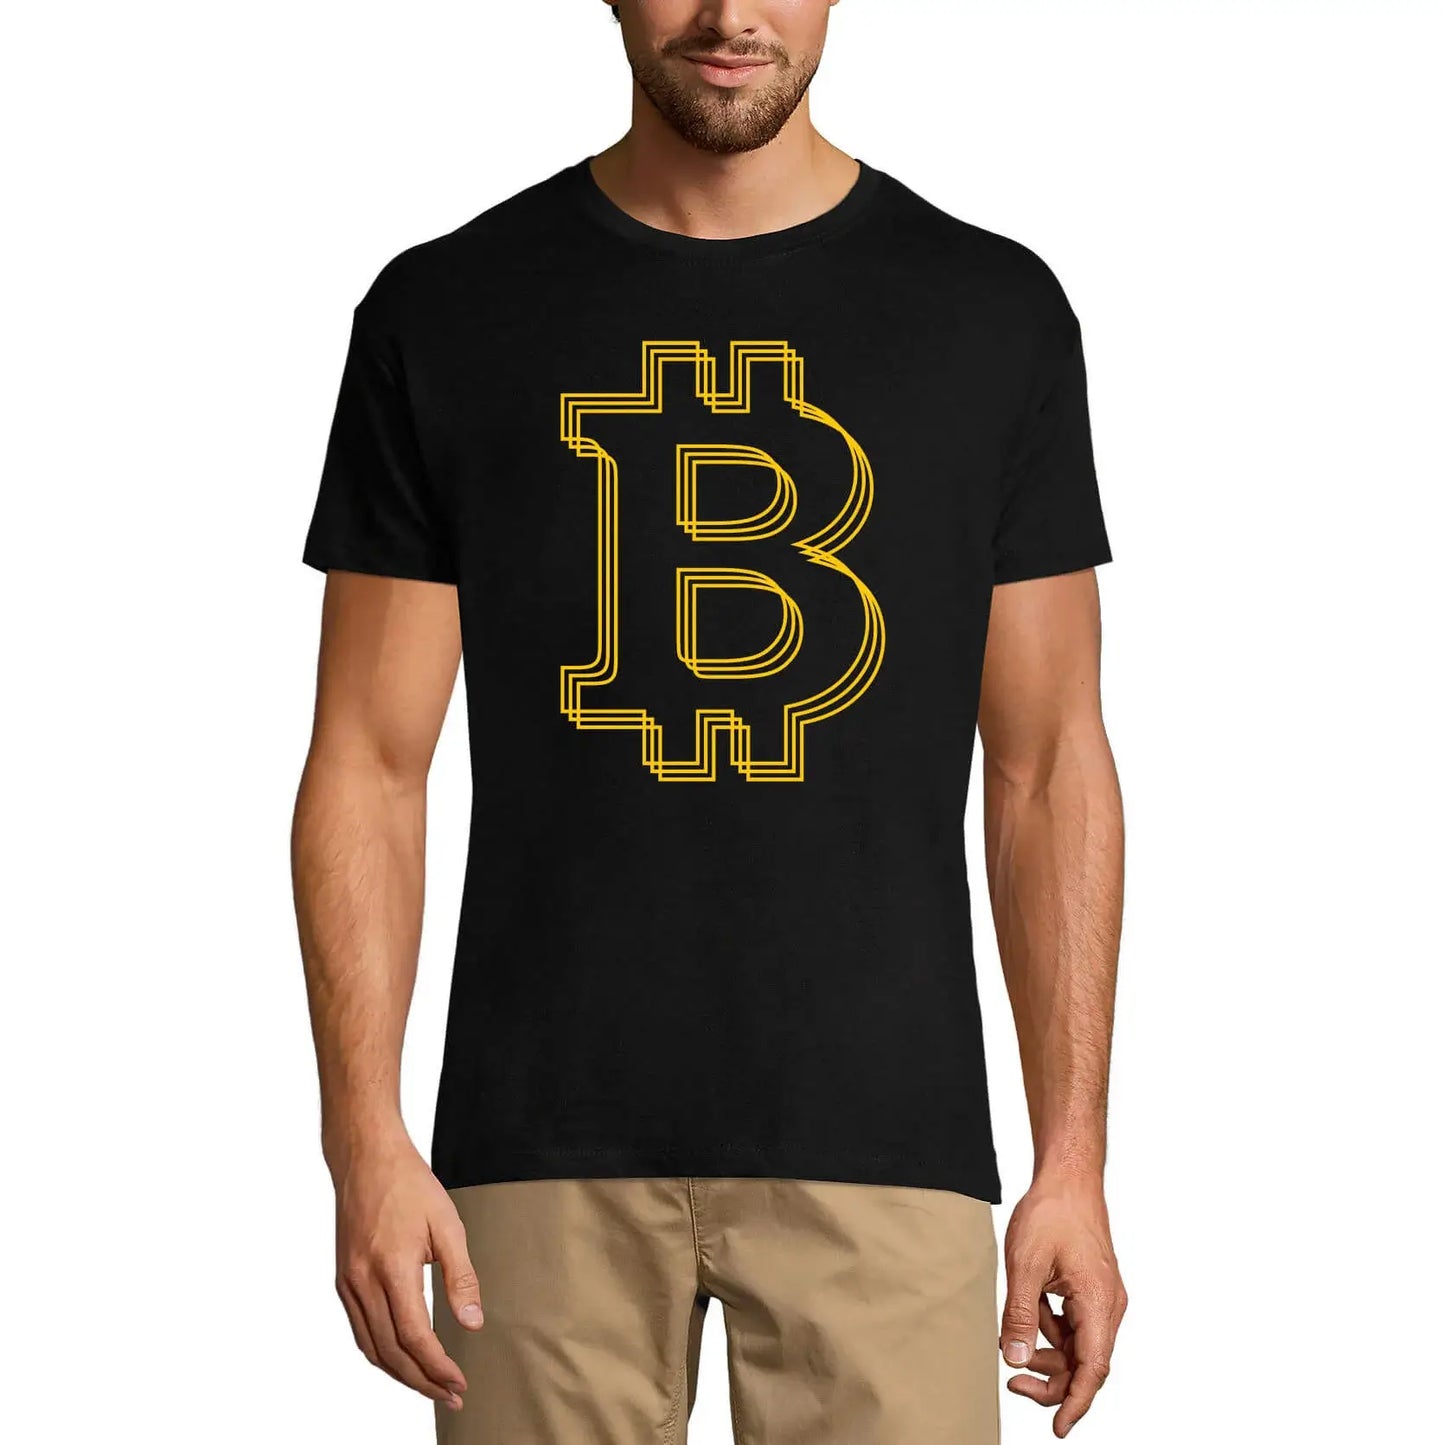 Men's Graphic T-Shirt Bitcoin Sign - One Coin - Blockchain Currency Eco-Friendly Limited Edition Short Sleeve Tee-Shirt Vintage Birthday Gift Novelty